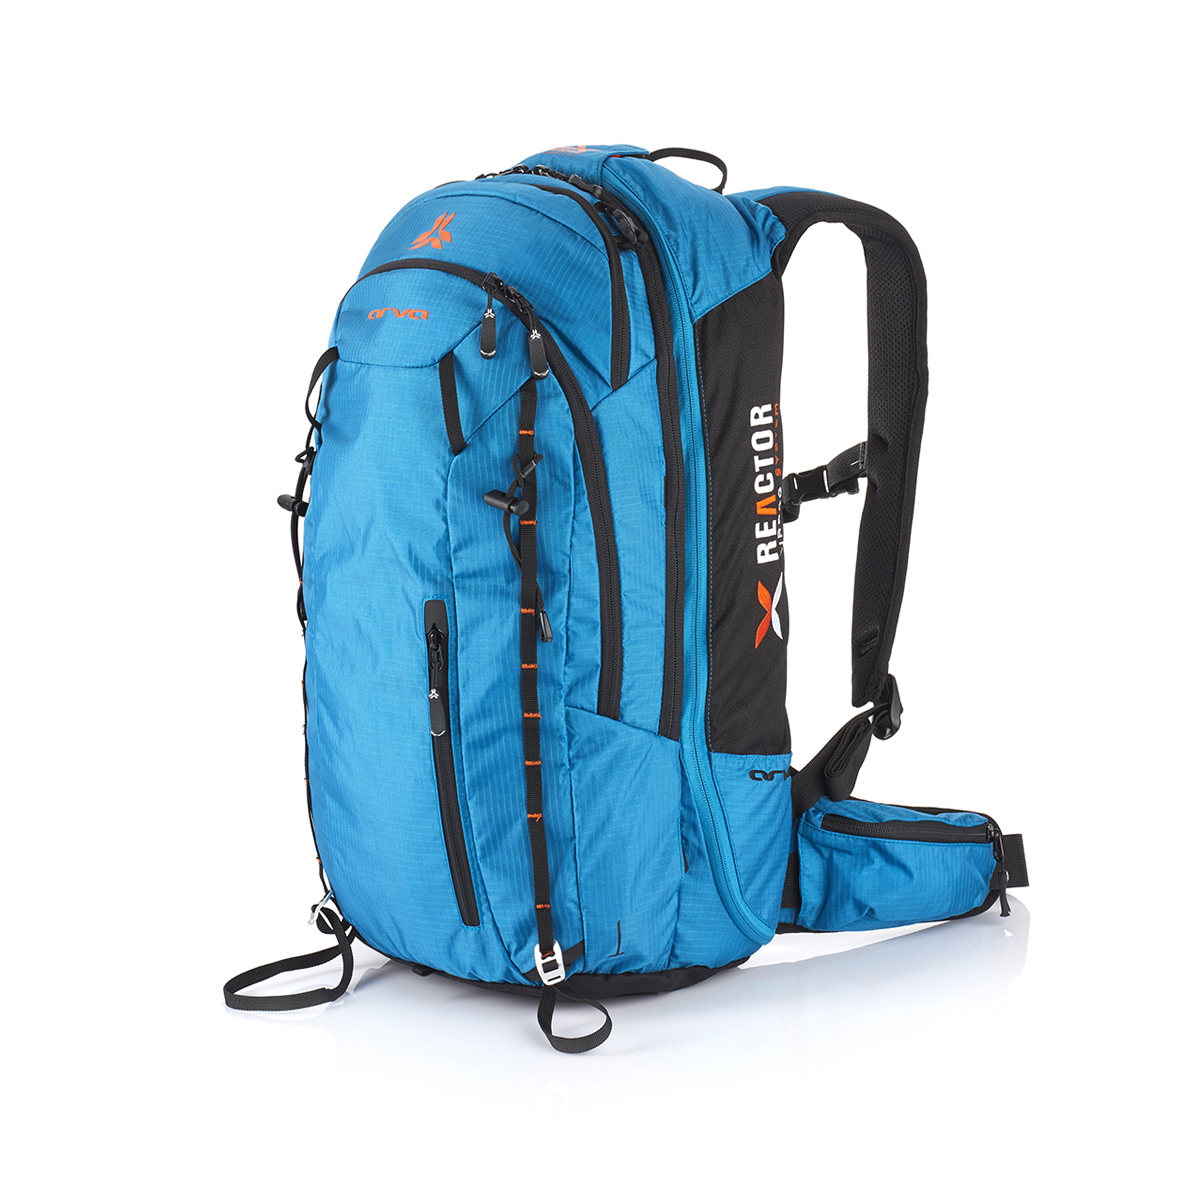 Avalanche Airbag Arva Reactor 32 Review